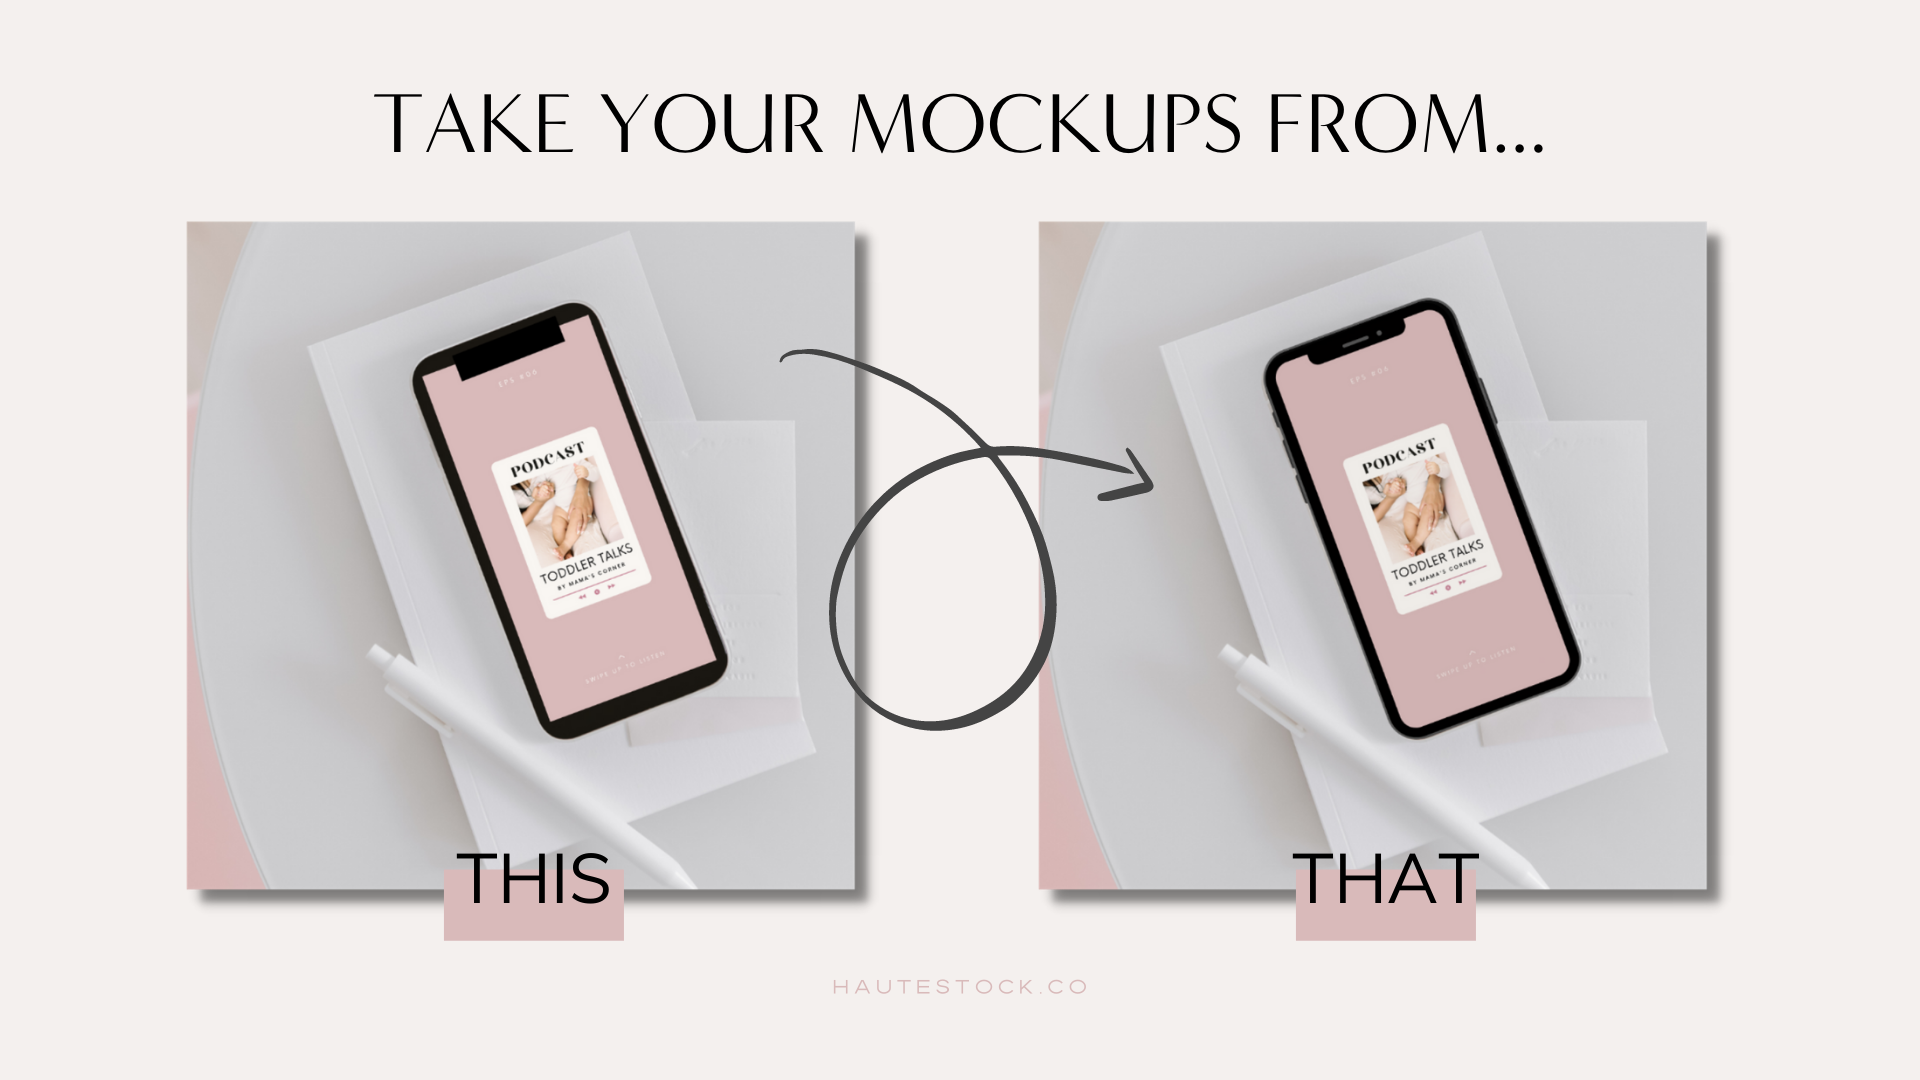 Learn Haute Stock's graphic design tip for easily mocking up a design on the newest iphone in Canva.